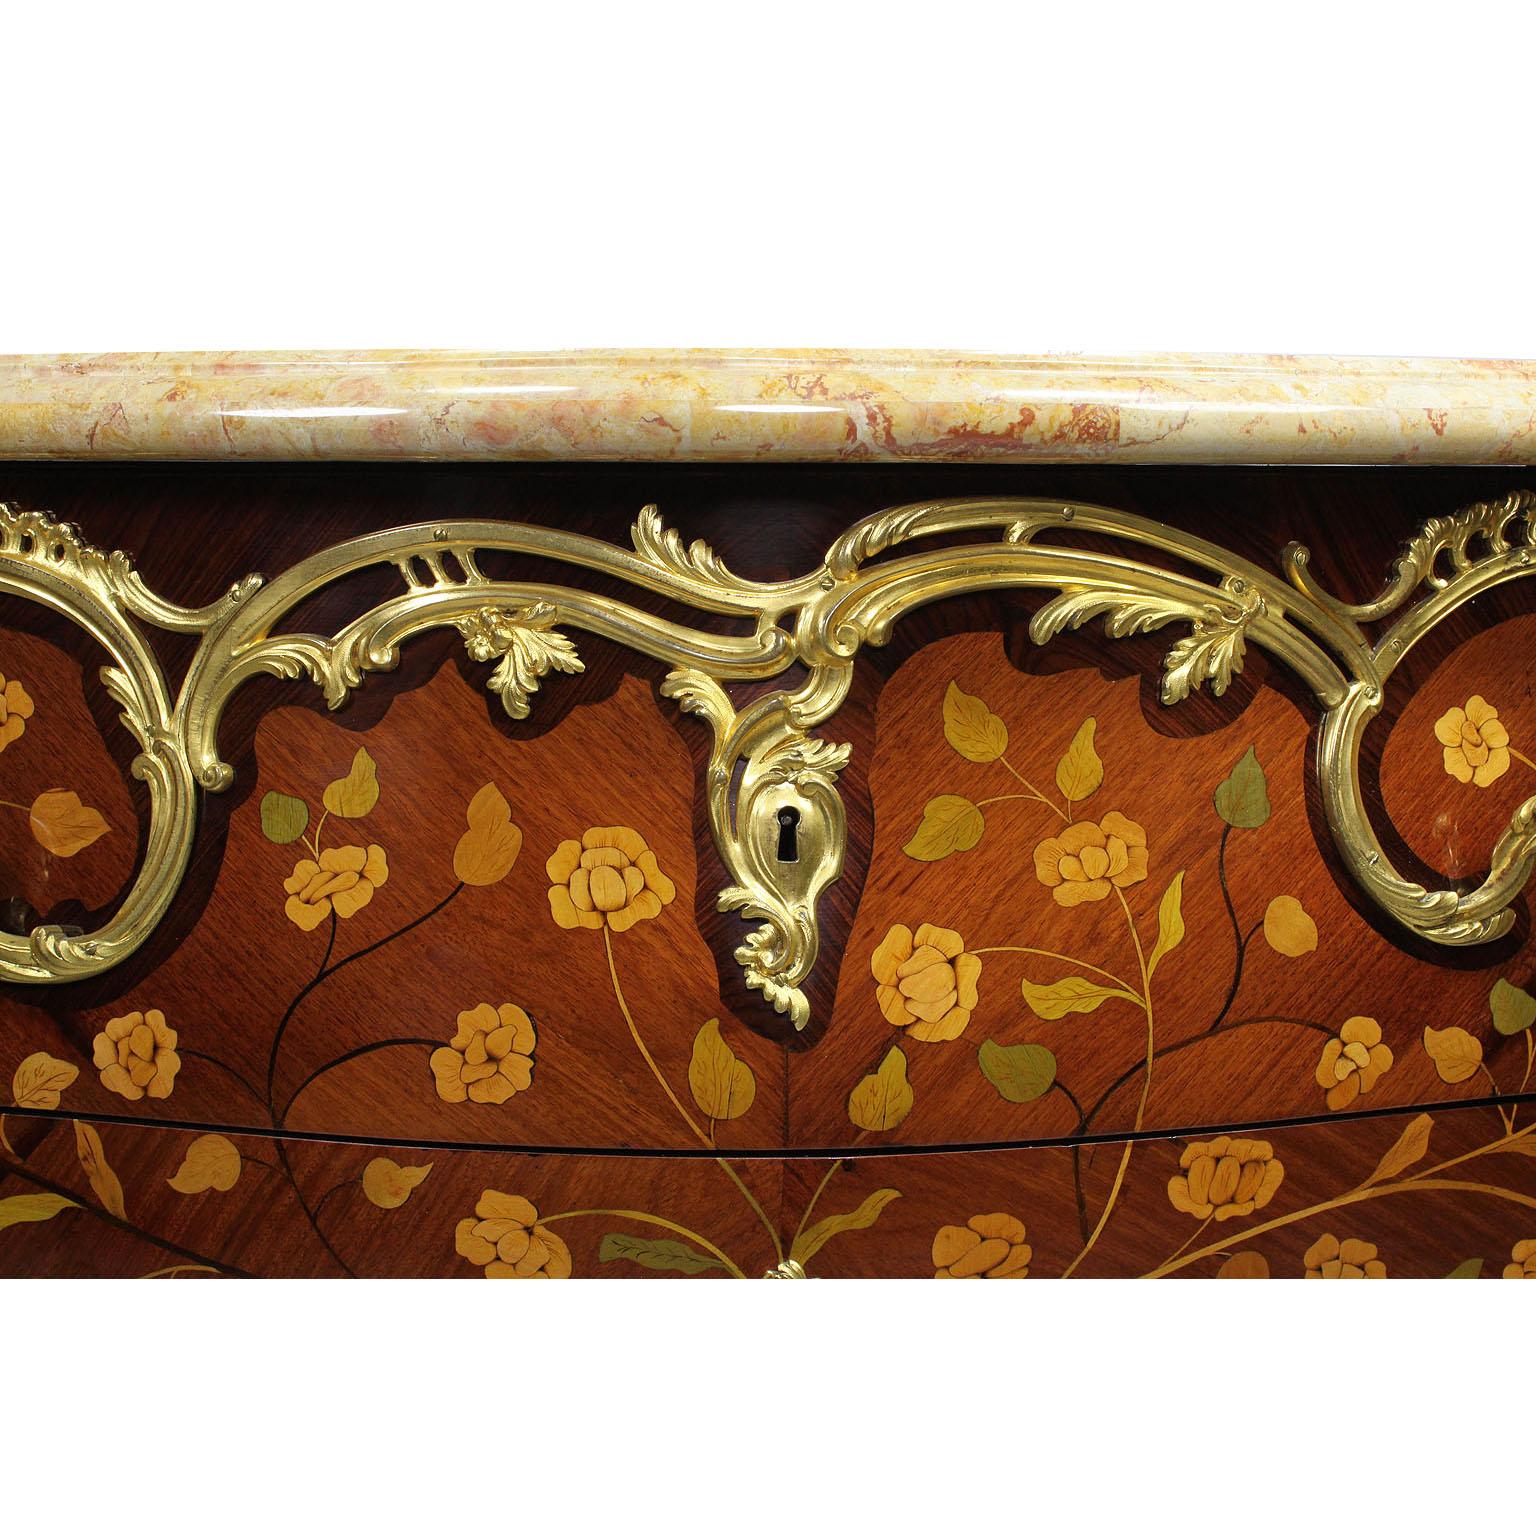 French 19th Century Louis XV Style Gilt Bronze-Mounted Marquetry Commodes, Pair For Sale 1